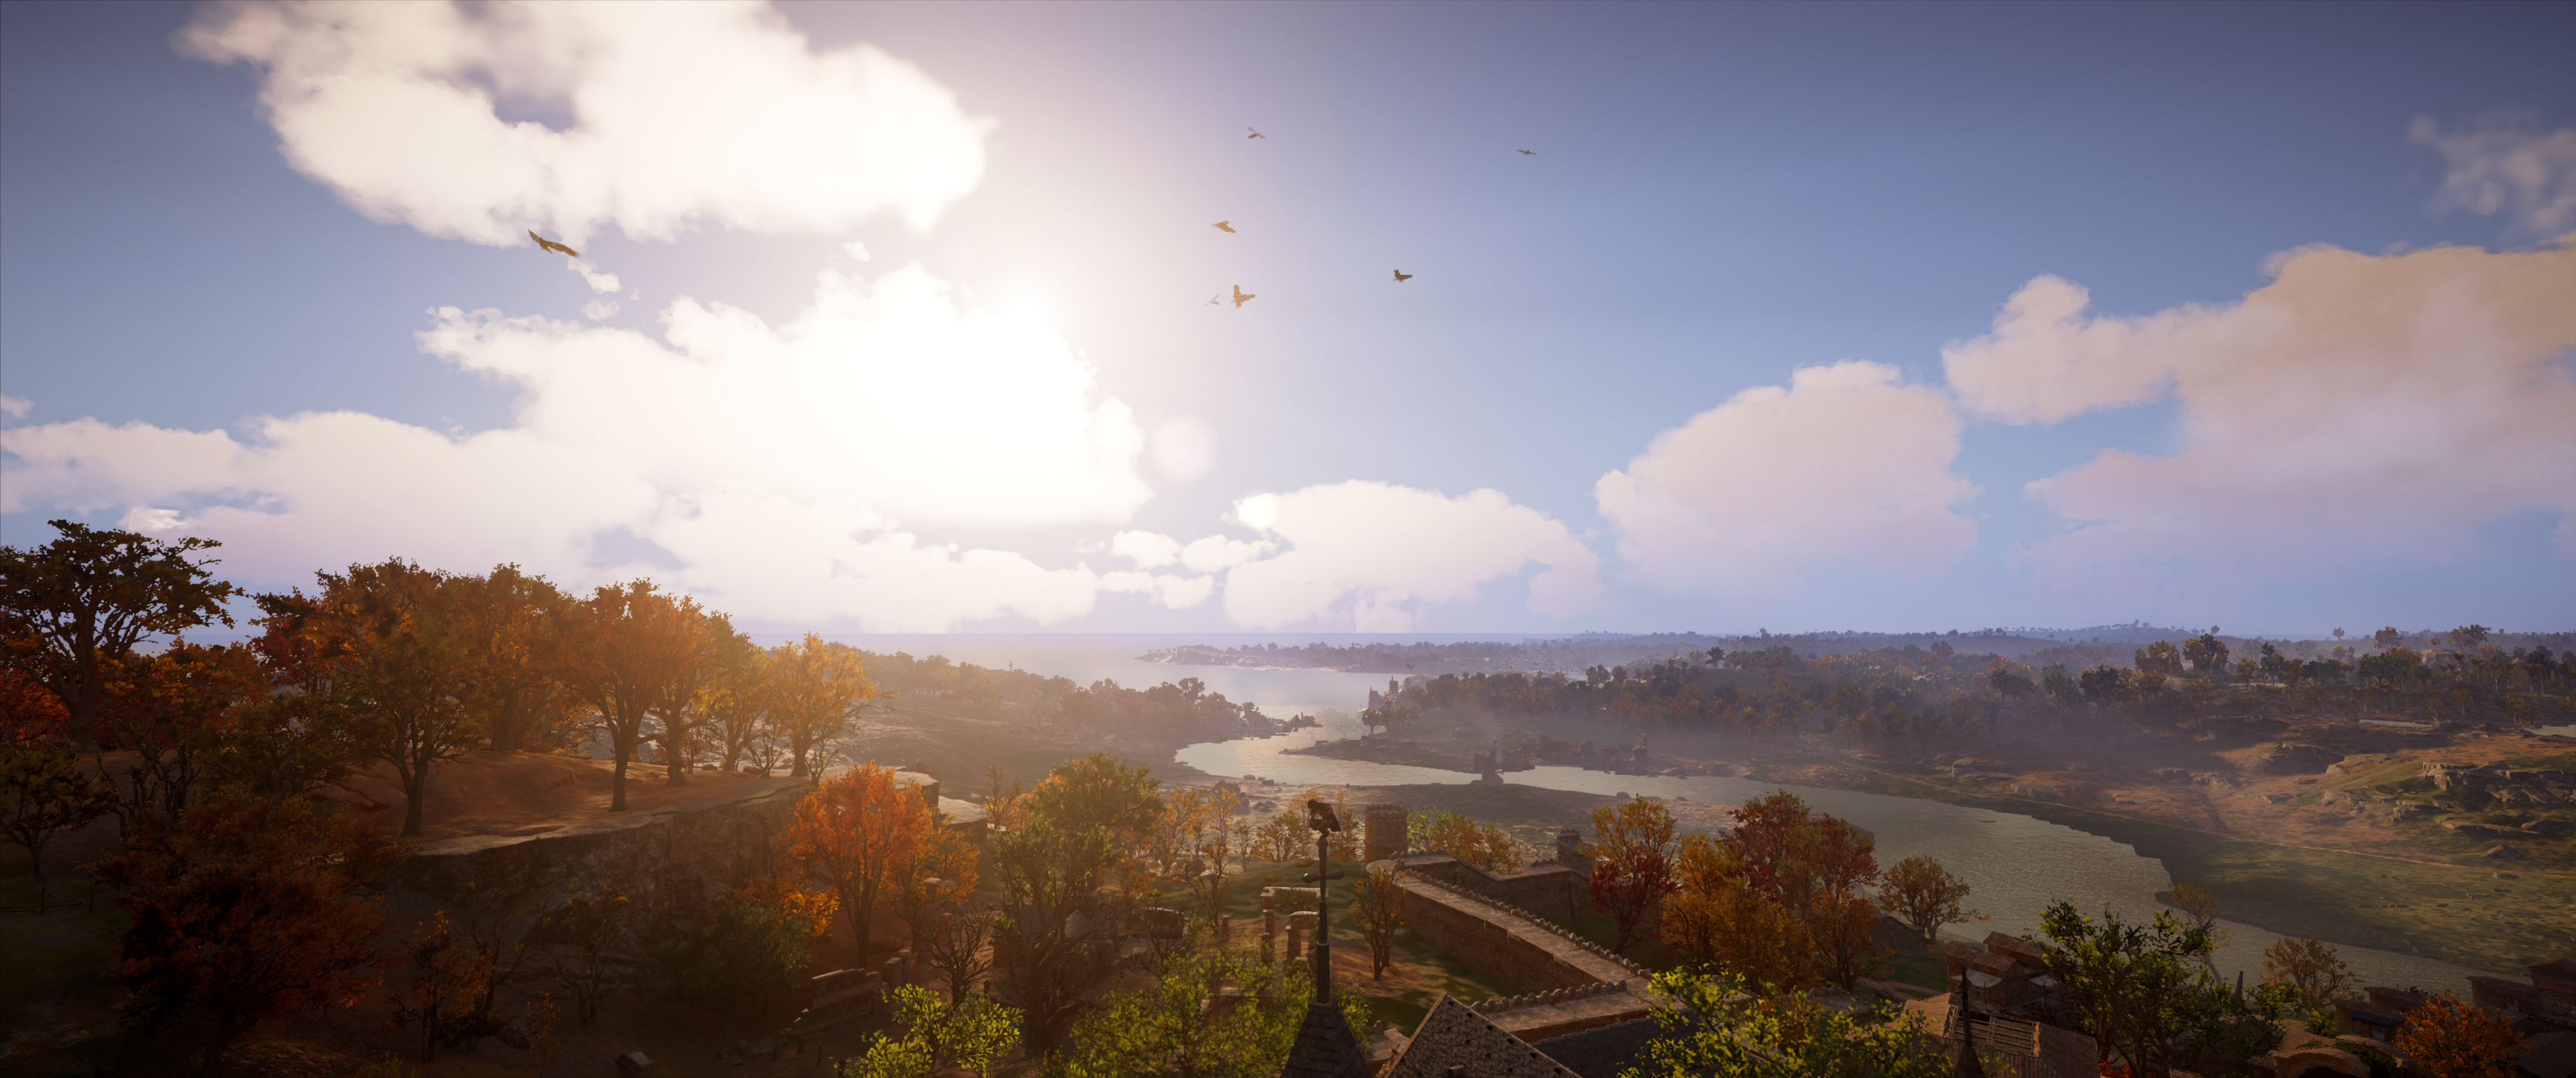 Landscape Assassins Creed Valhalla Trees Mountains Clouds Clear Sky 3440x1440